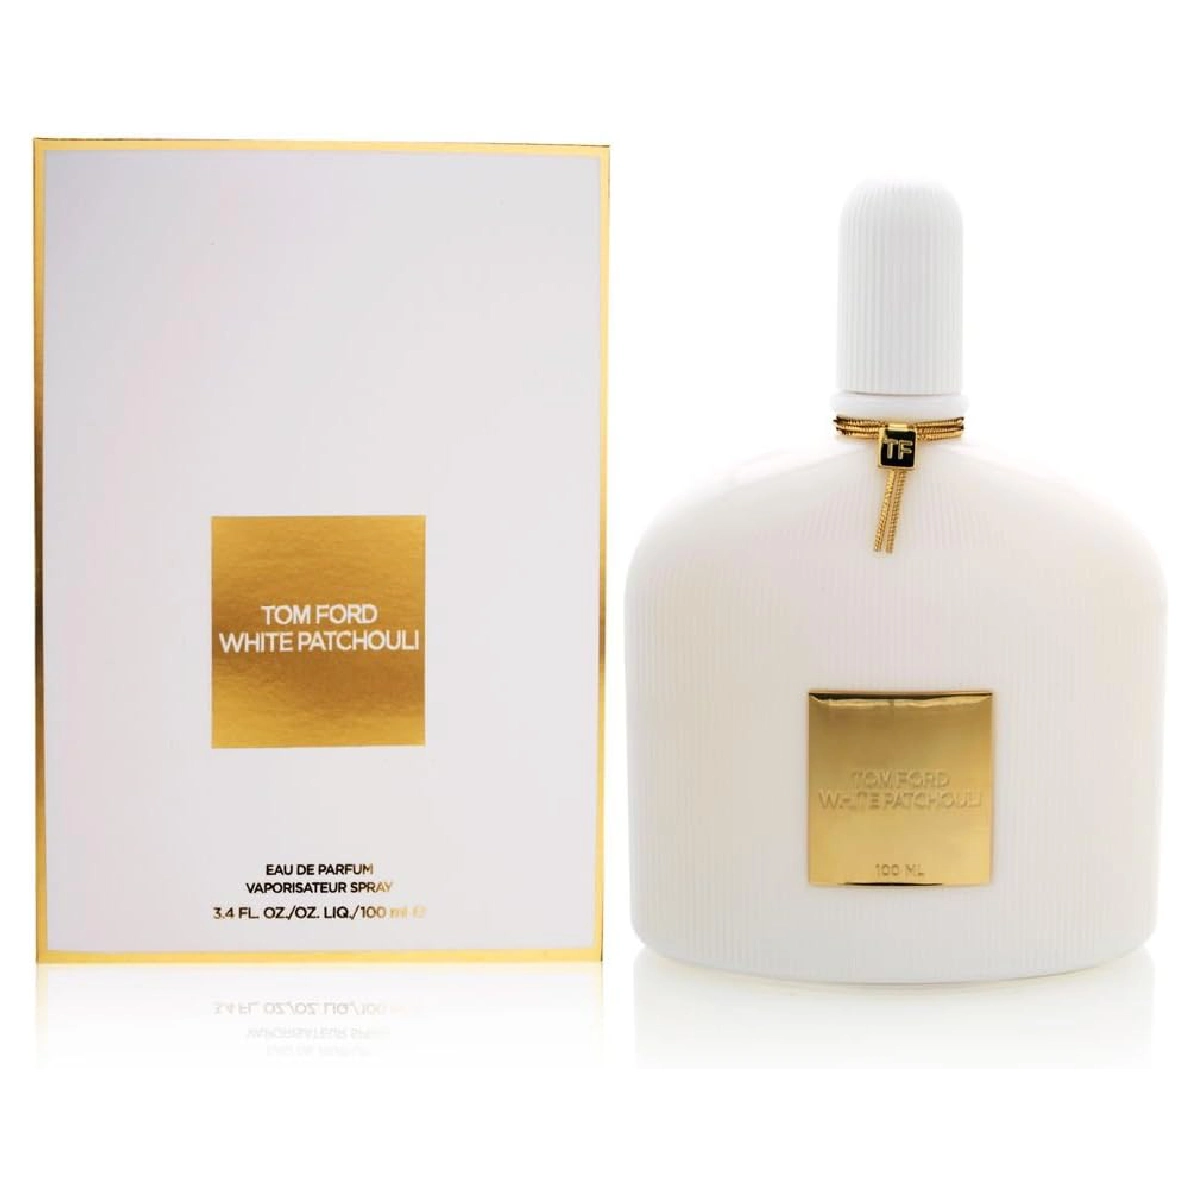 Tom Ford White Patchouli perfume bottle on a pristine white background